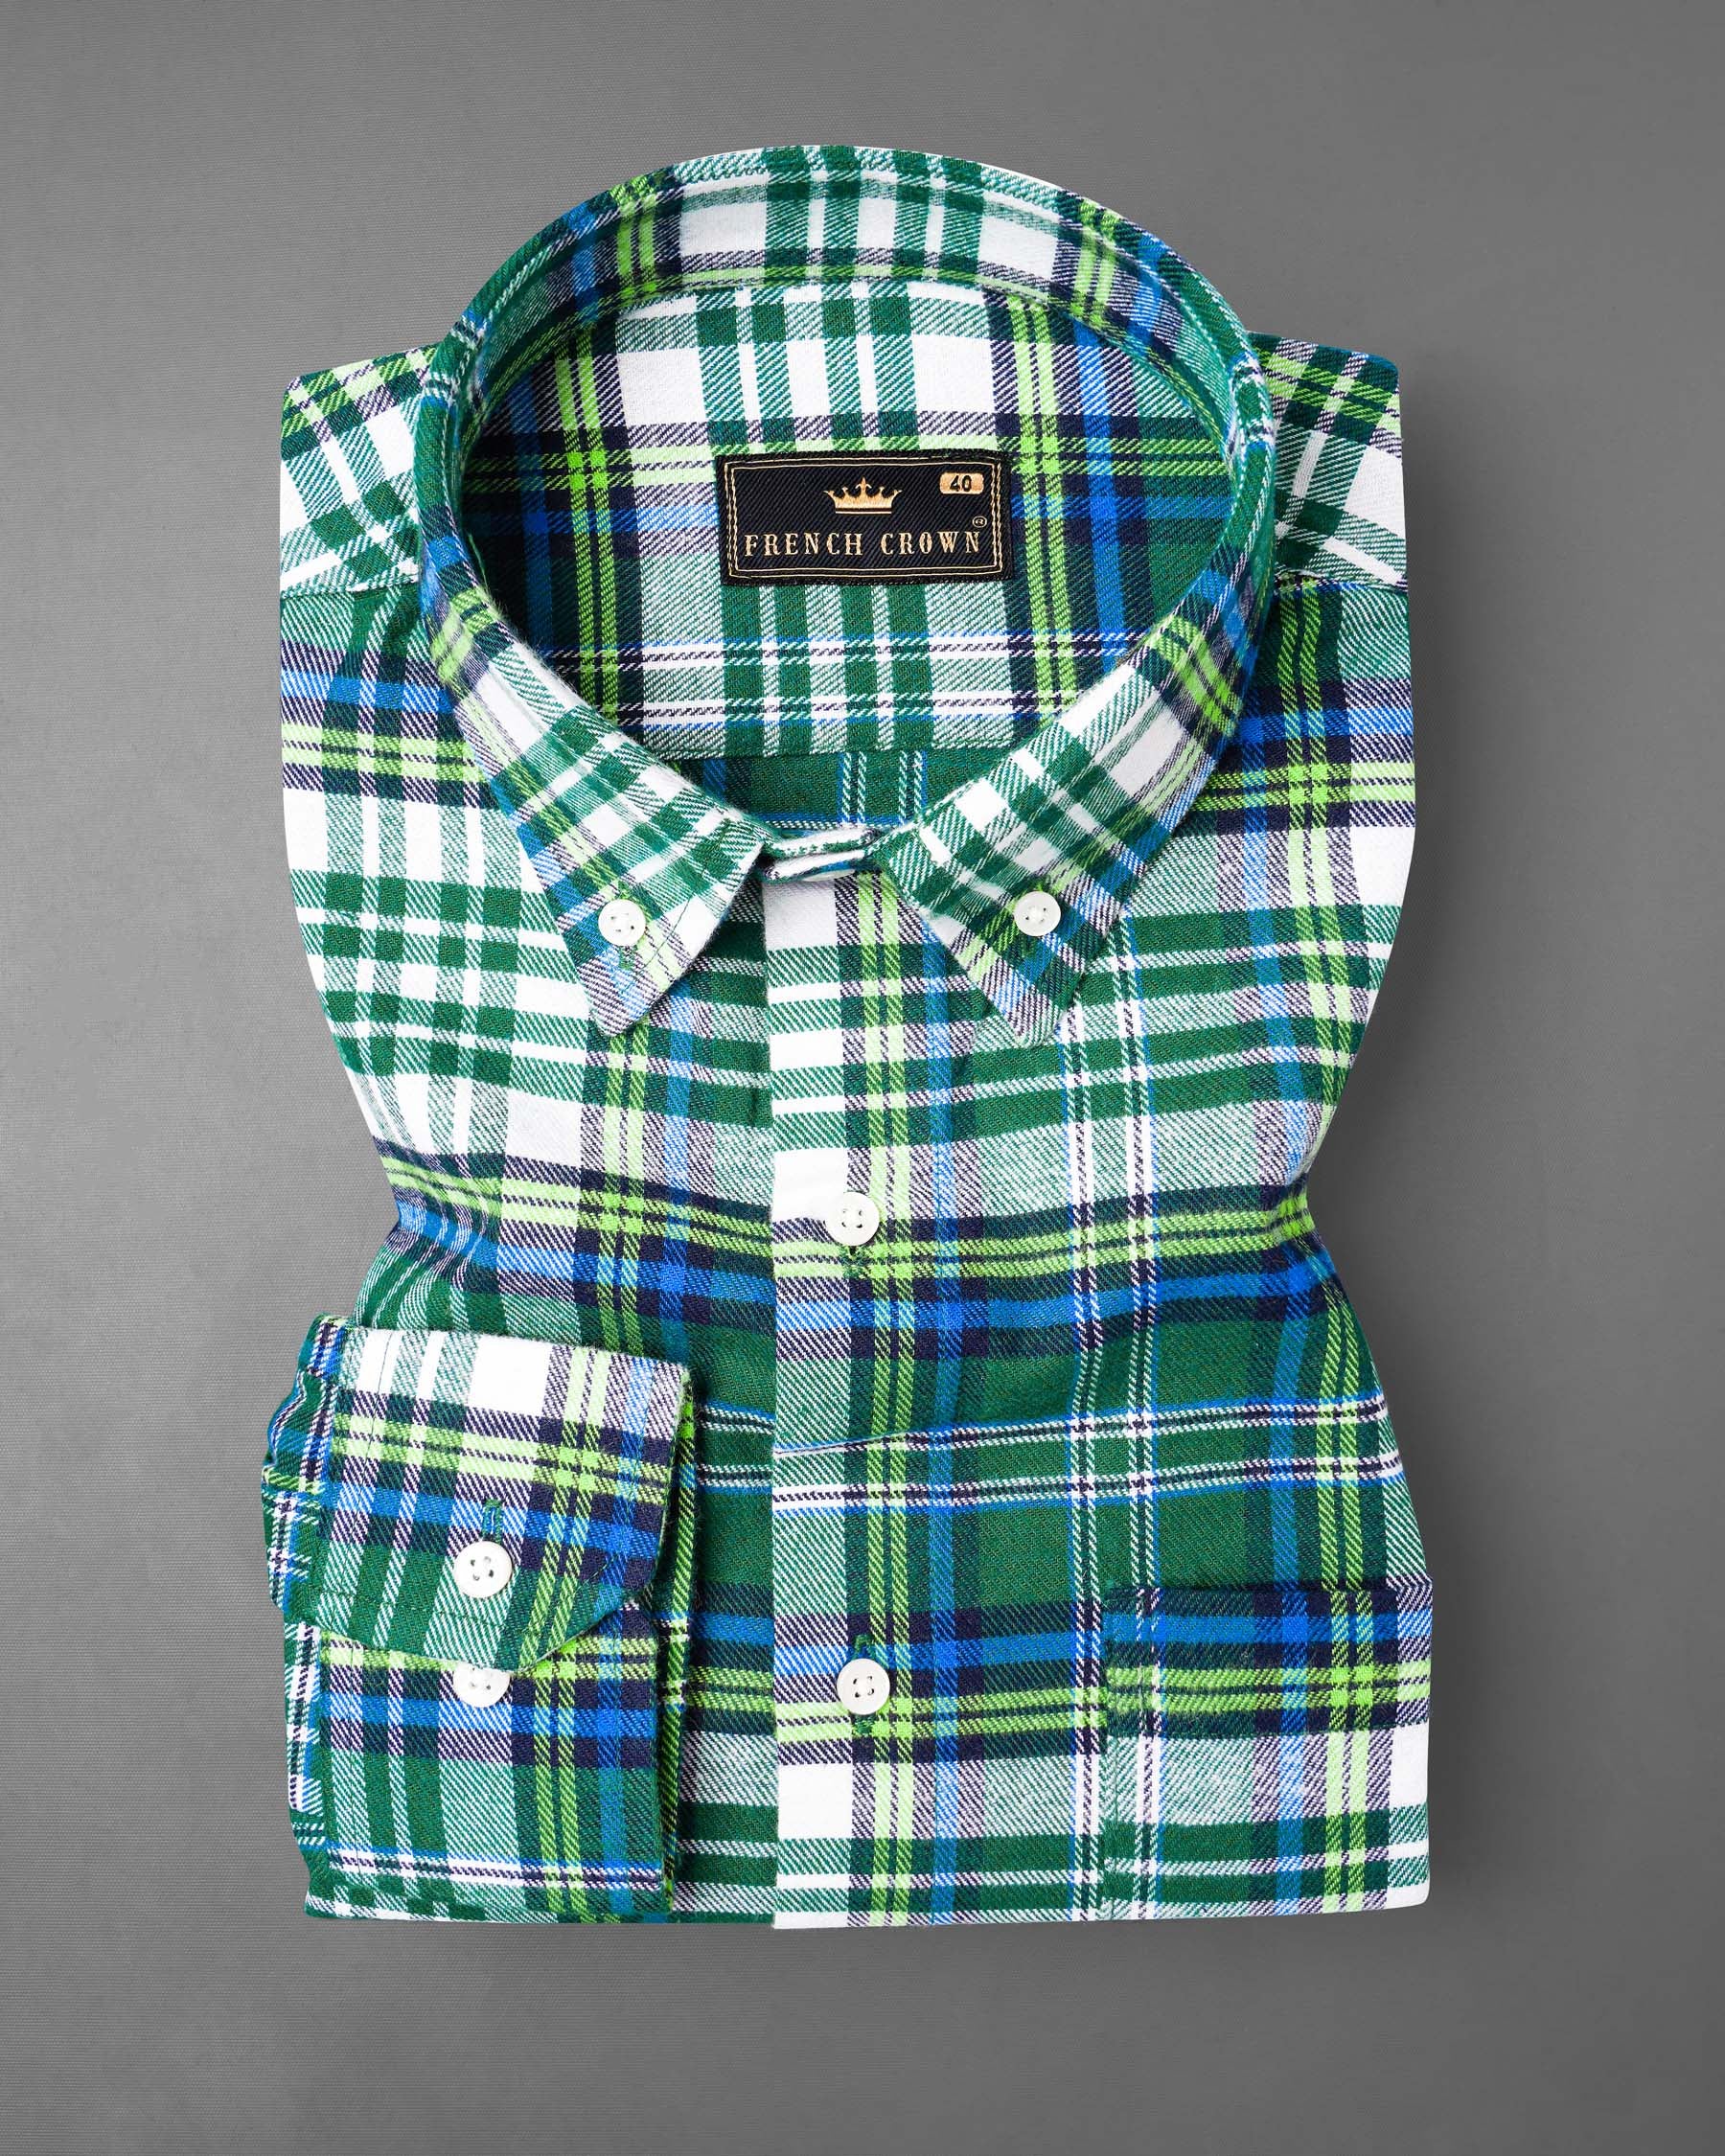 Dark Teal Green and White Plaid Flannel Overshirt 7639-BD-38, 7639-BD-H-38, 7639-BD-39,7639-BD-H-39, 7639-BD-40, 7639-BD-H-40, 7639-BD-42, 7639-BD-H-42, 7639-BD-44, 7639-BD-H-44, 7639-BD-46, 7639-BD-H-46, 7639-BD-48, 7639-BD-H-48, 7639-BD-50, 7639-BD-H-50, 7639-BD-52, 7639-BD-H-52